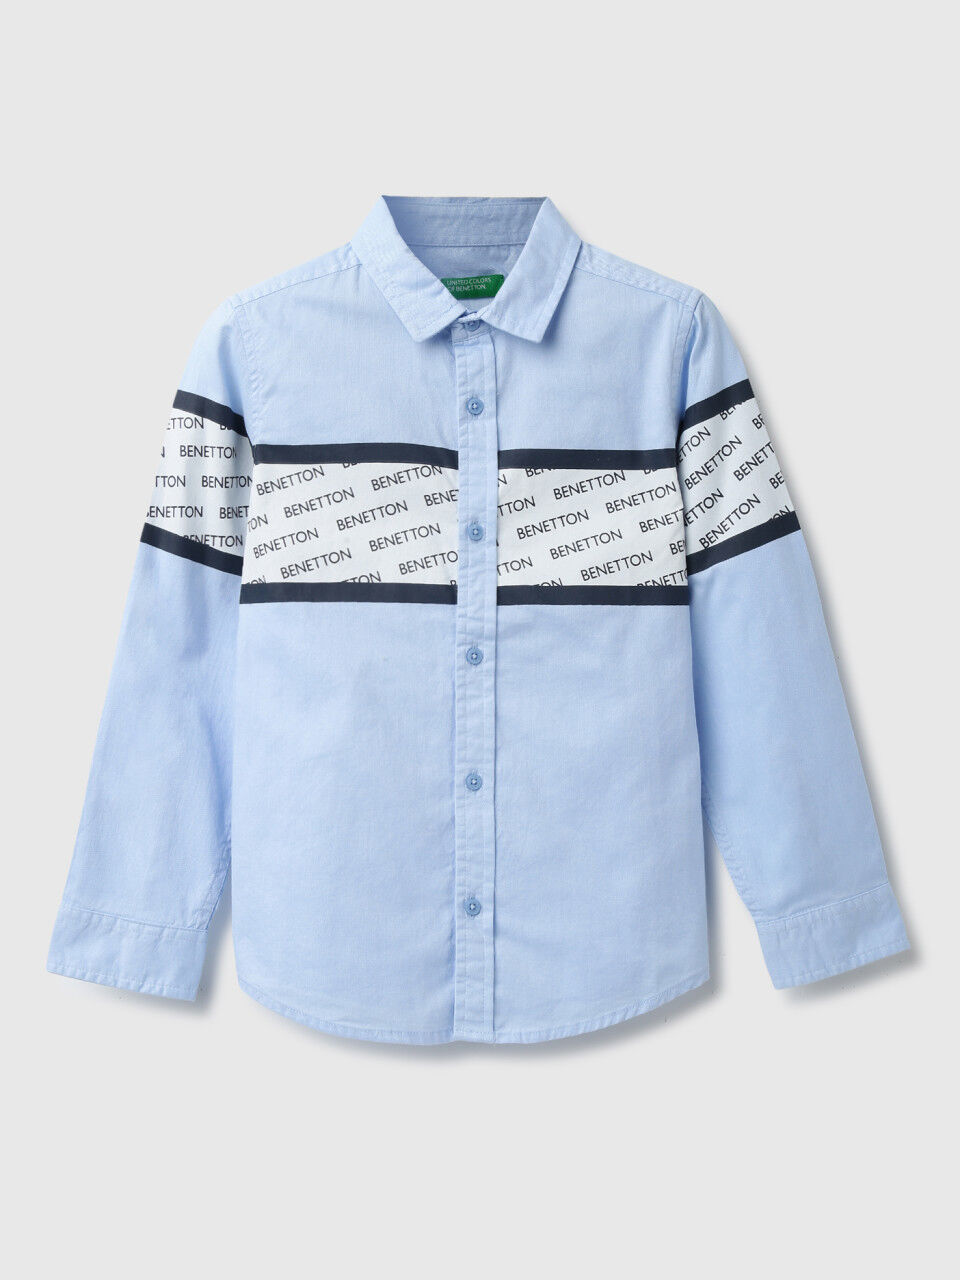 United Colors of Benetton Boys Printed Spread Collar Shirt